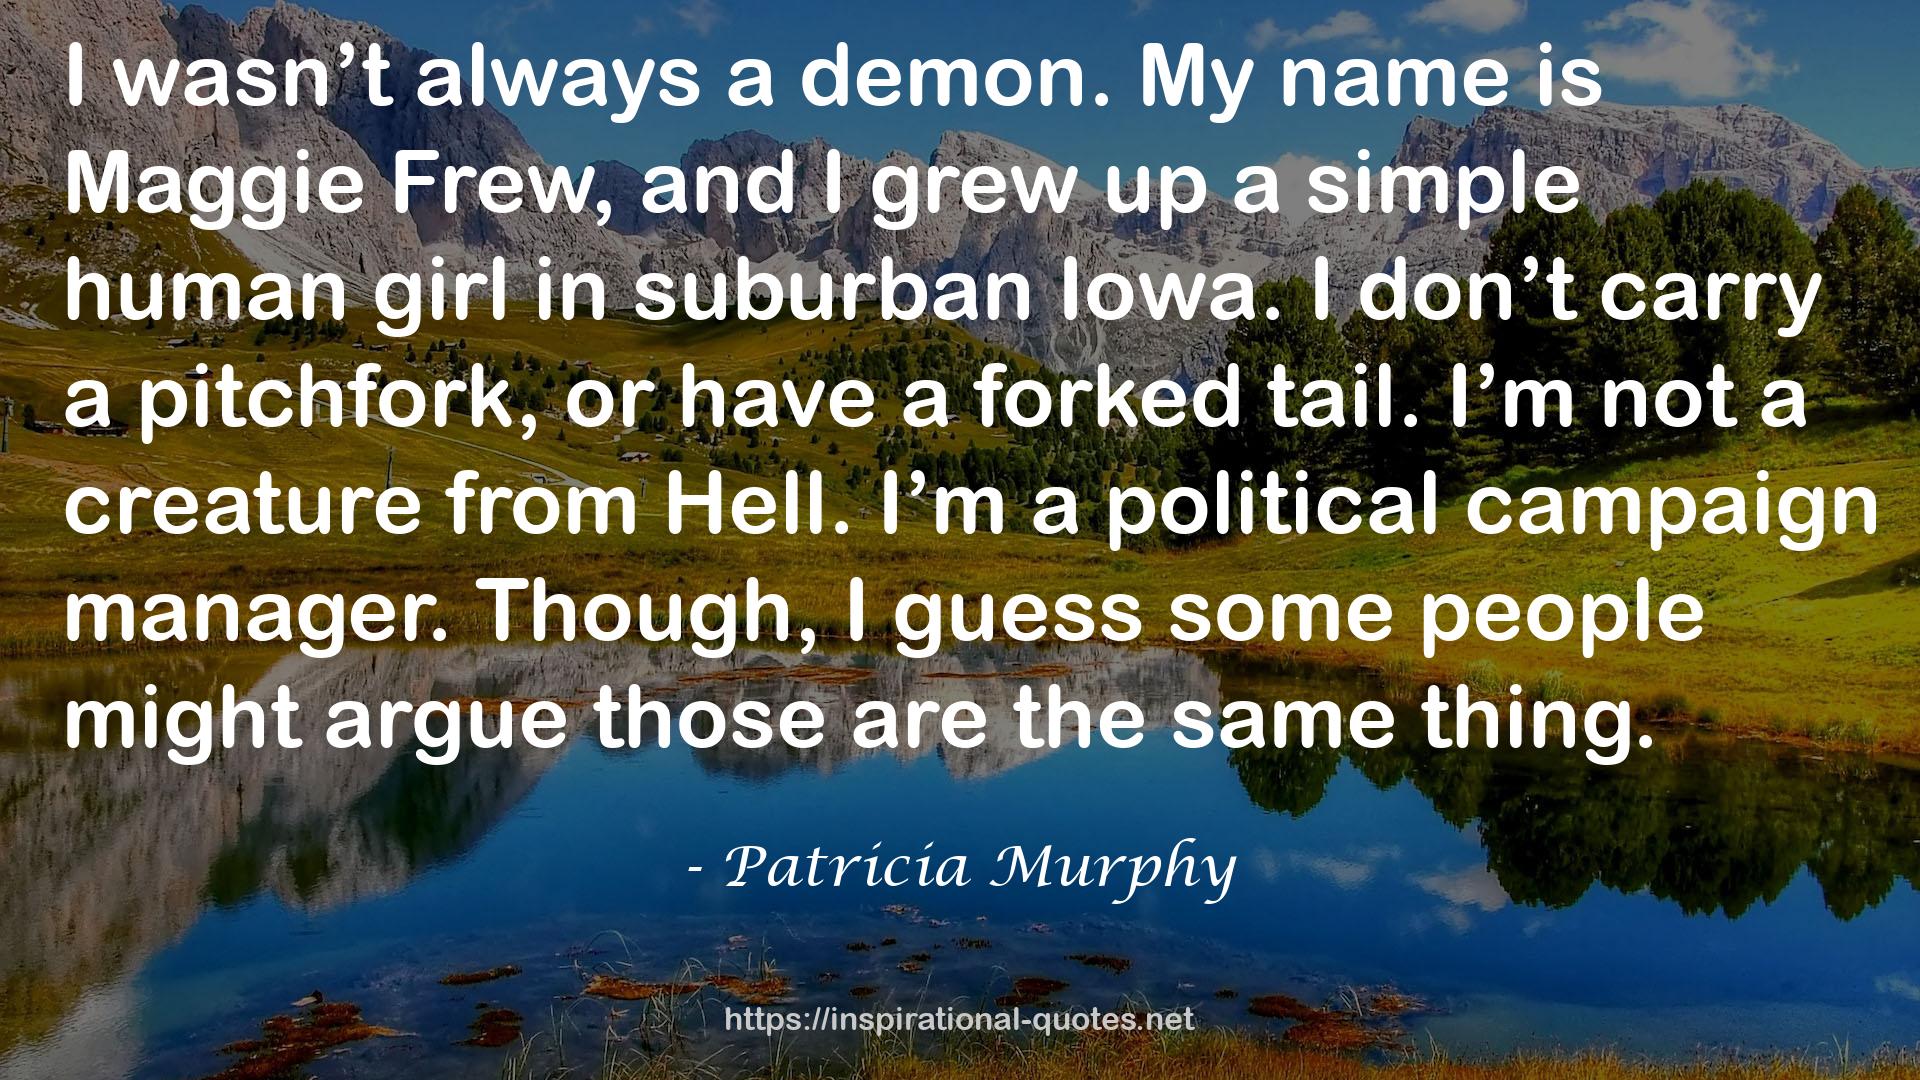 Patricia Murphy QUOTES